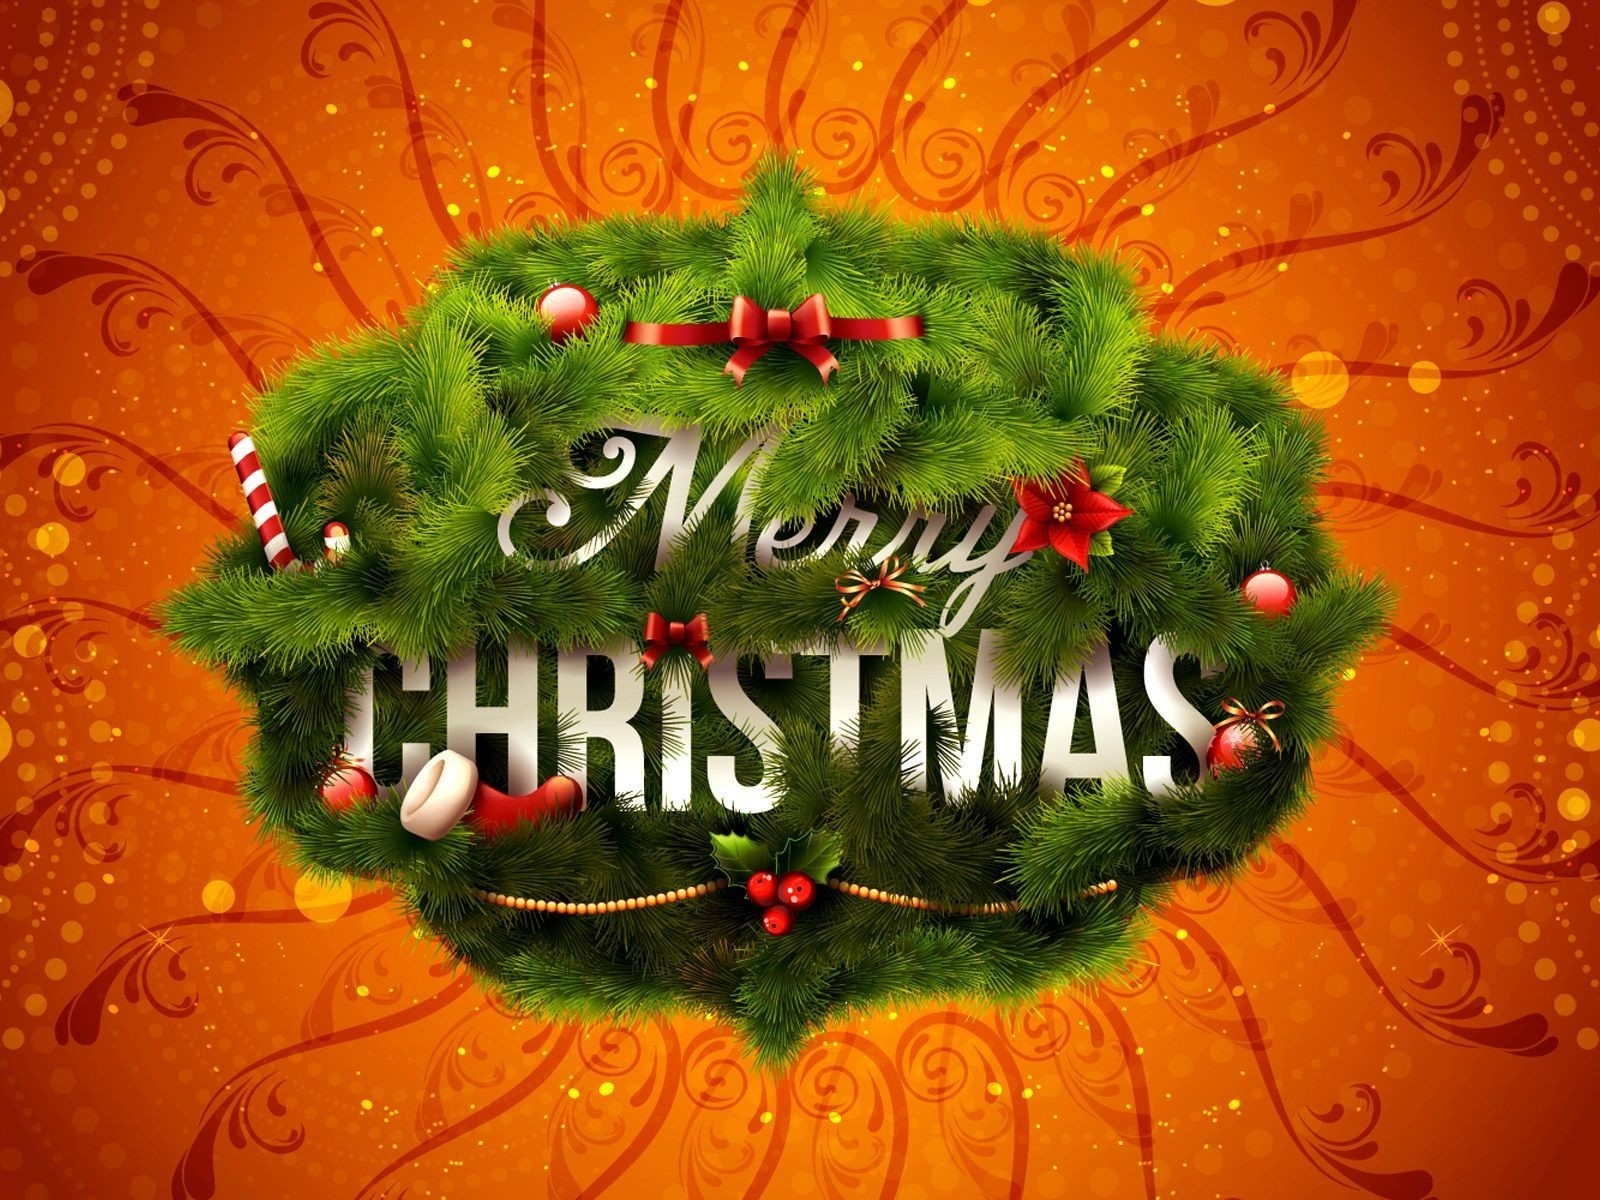 Merry Christmas Wreath for 1600 x 1200 resolution